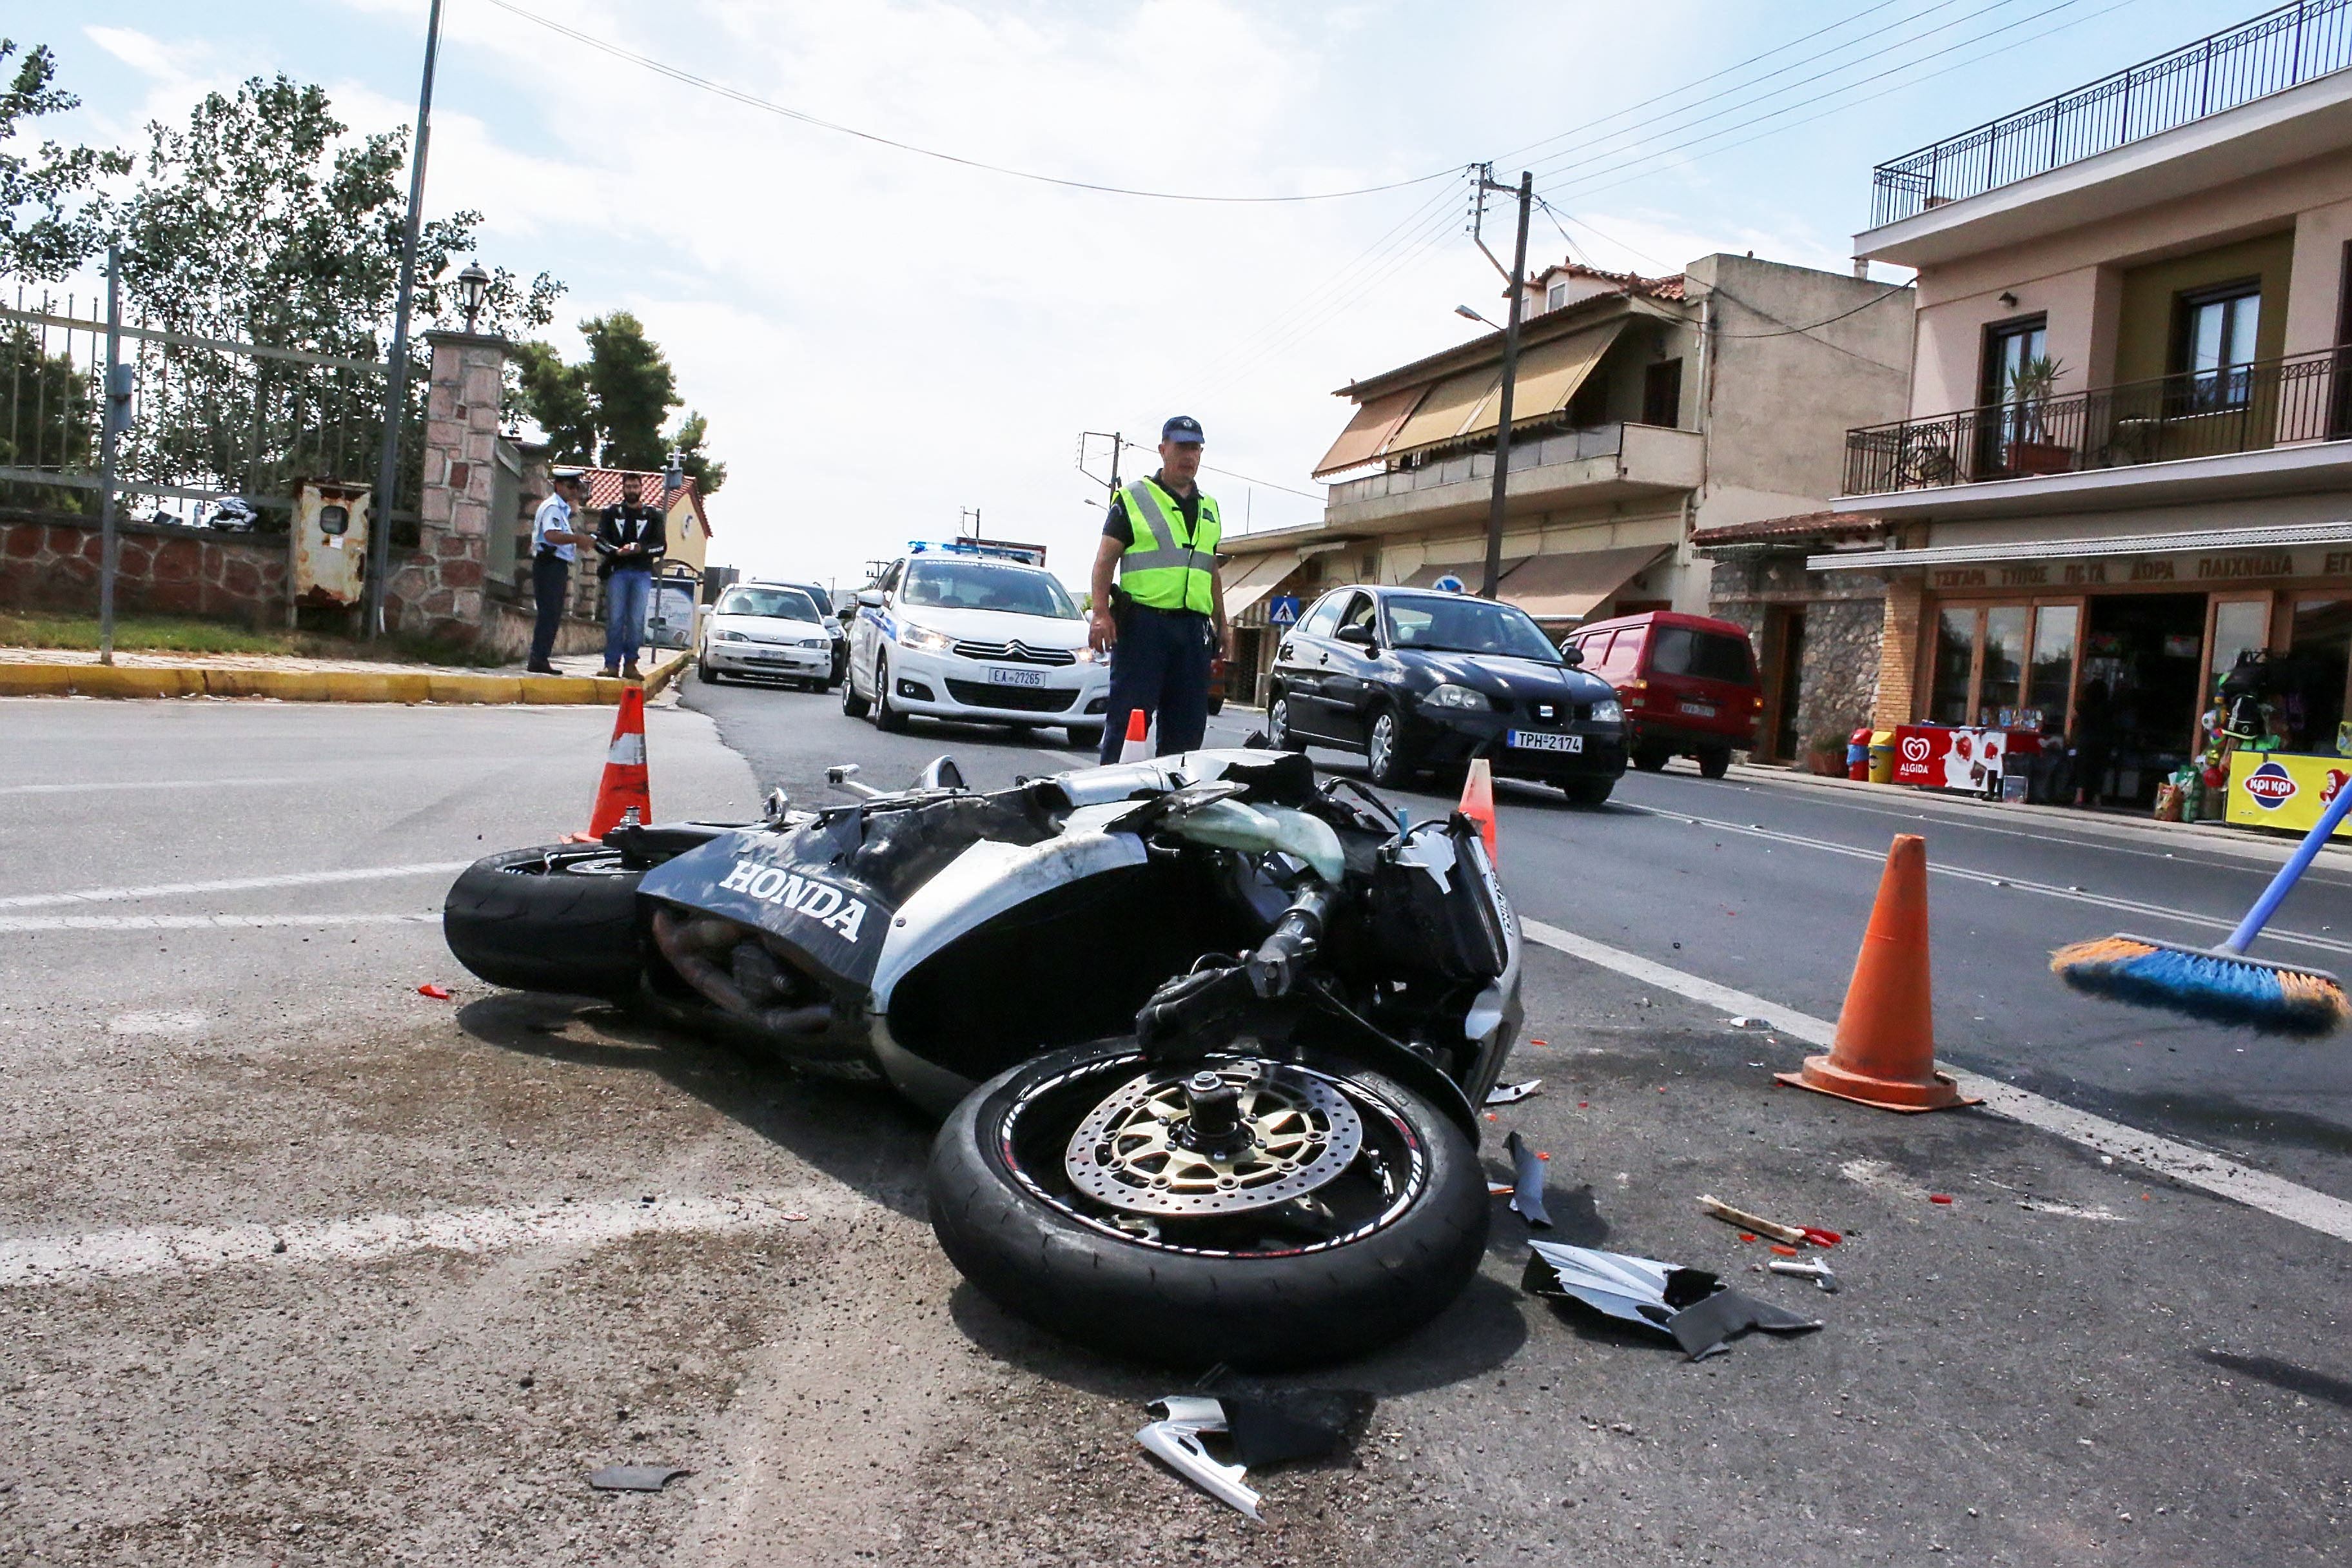 Motorcycle Crash - Motorcycle Surrounded By Cones